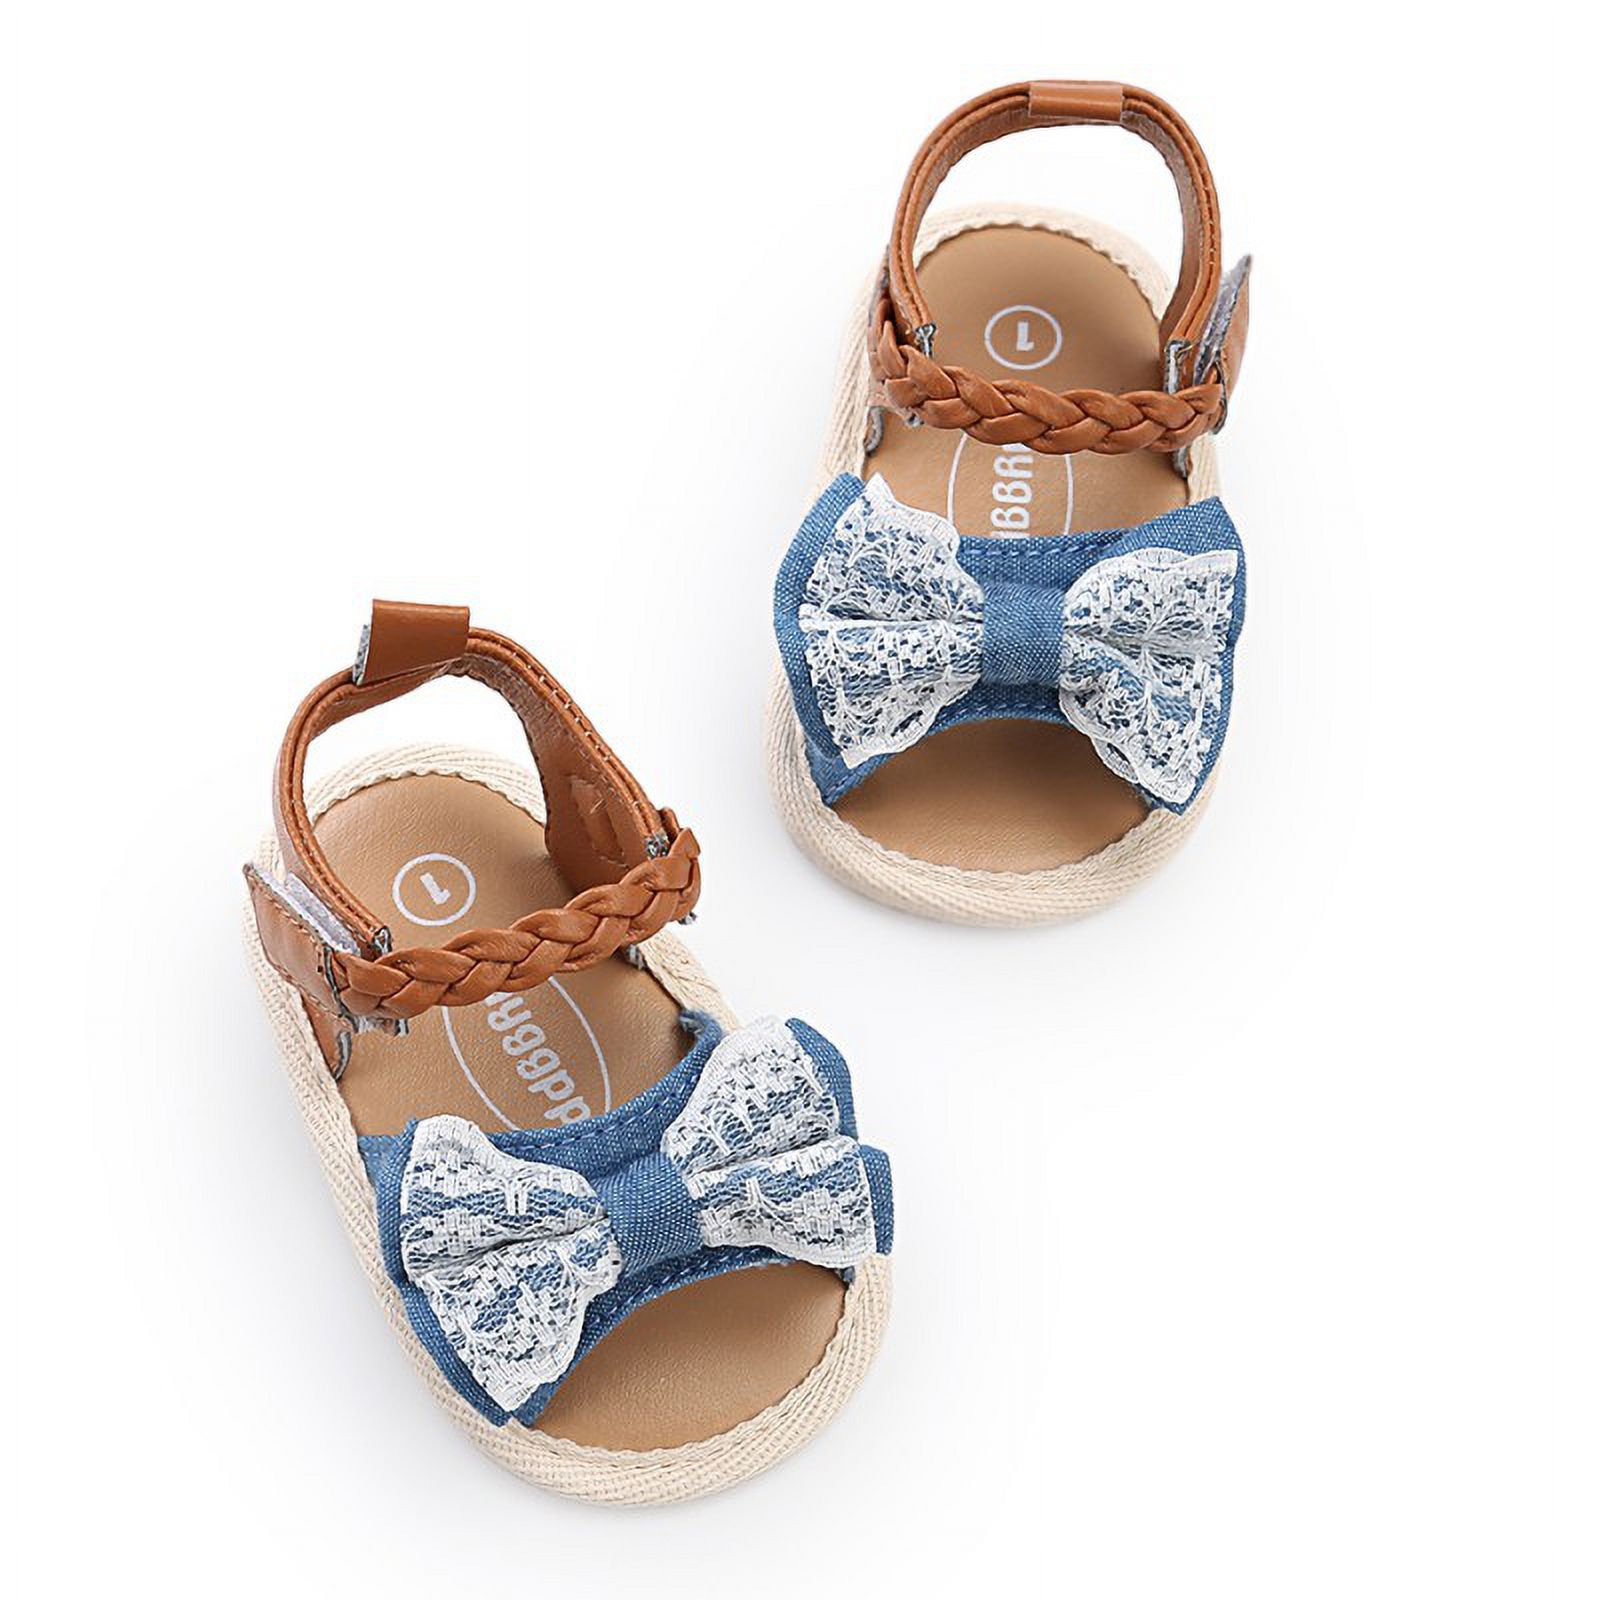 Baby Girls Sandals Summer Shoes Outdoor First Walker Toddler Girls Shoes for Summer - image 5 of 6